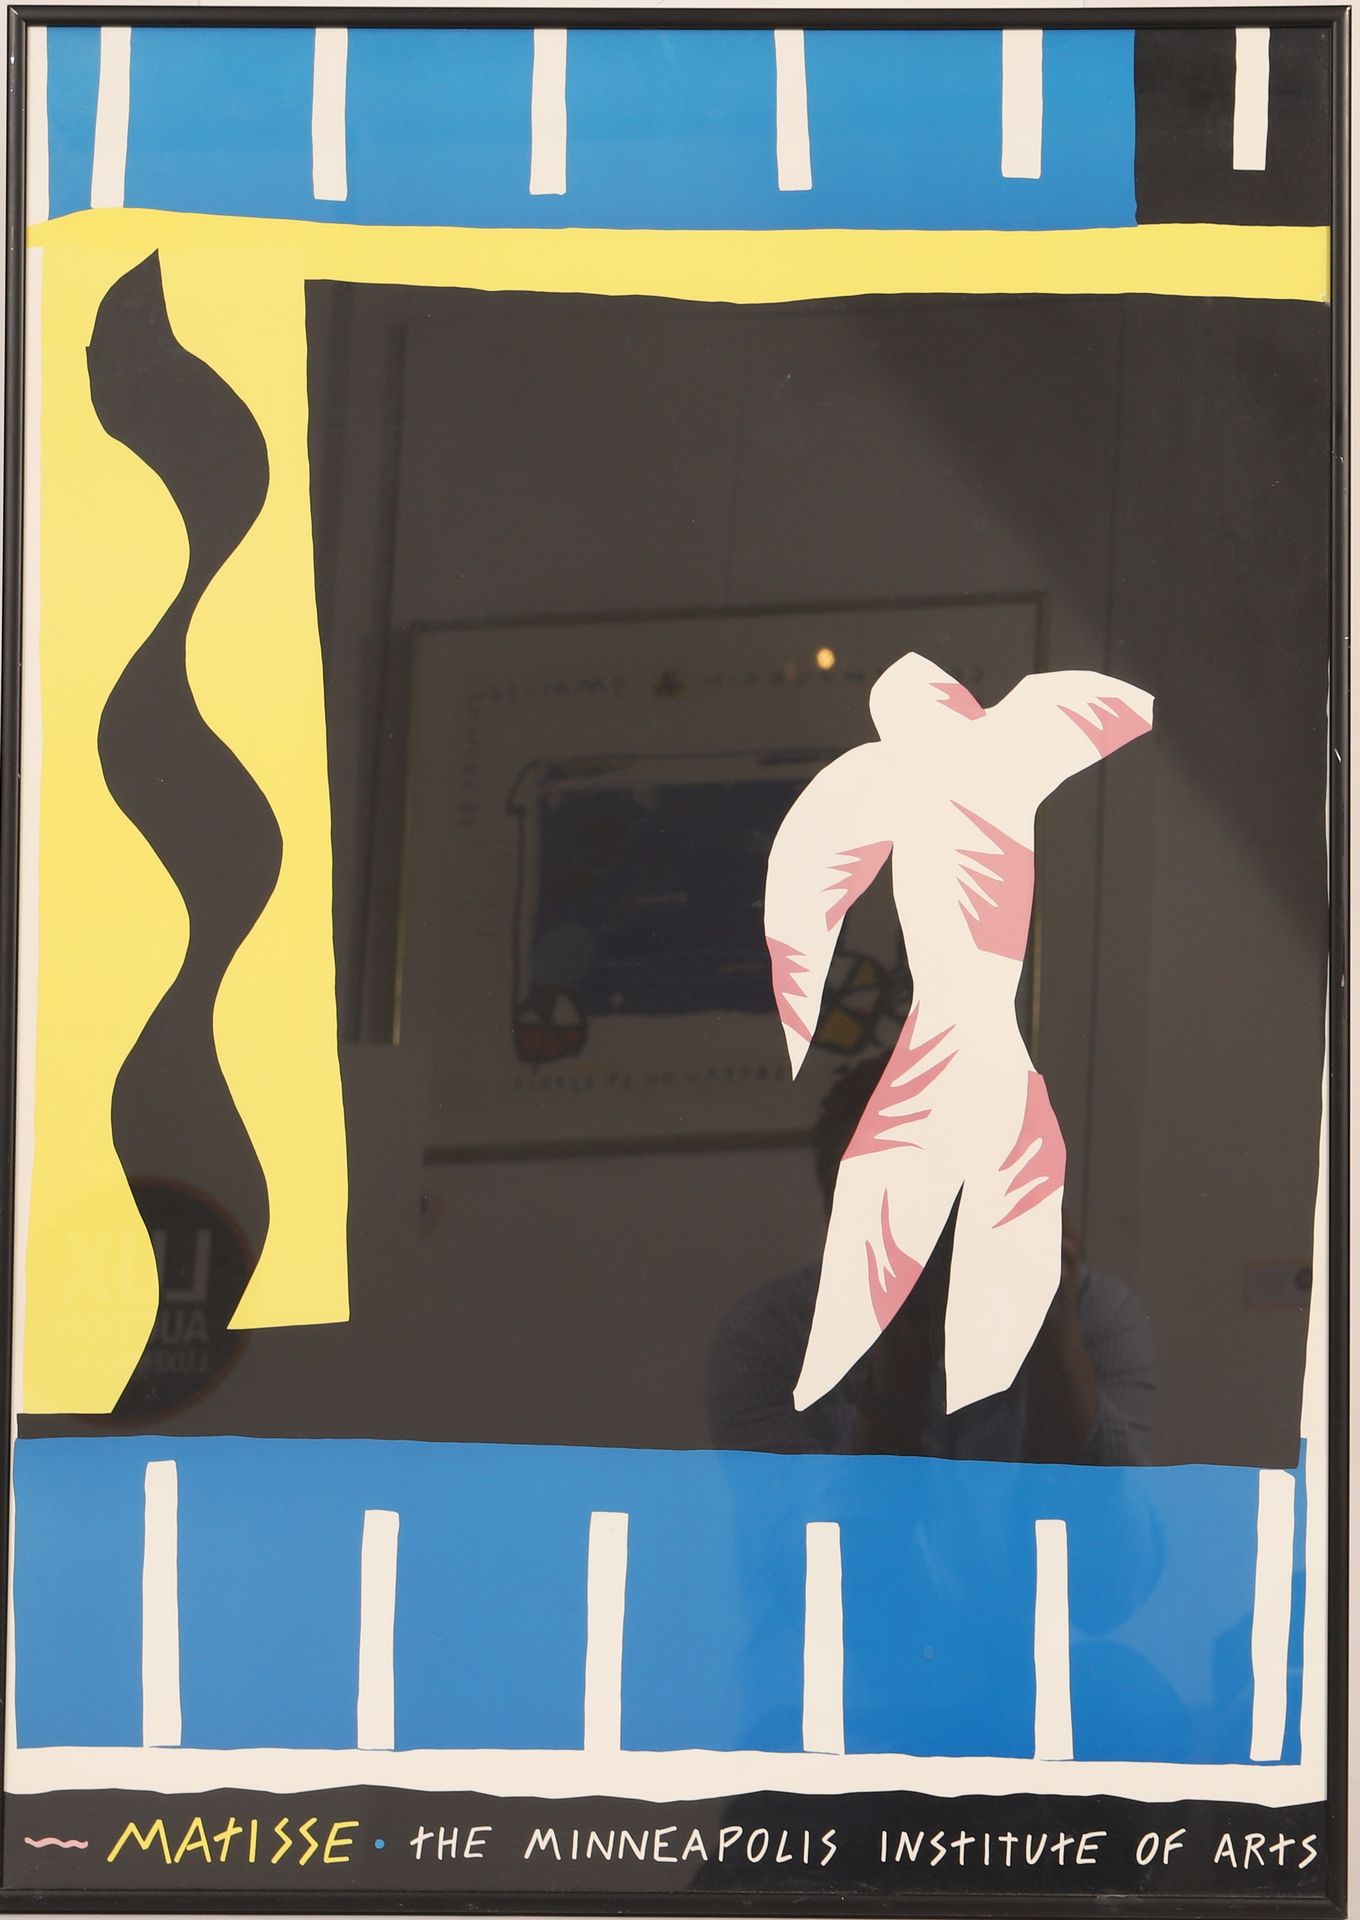 Null Poster Henri Matisse - Minneapolis Institute of Arts

Dimensions with frame&hellip;